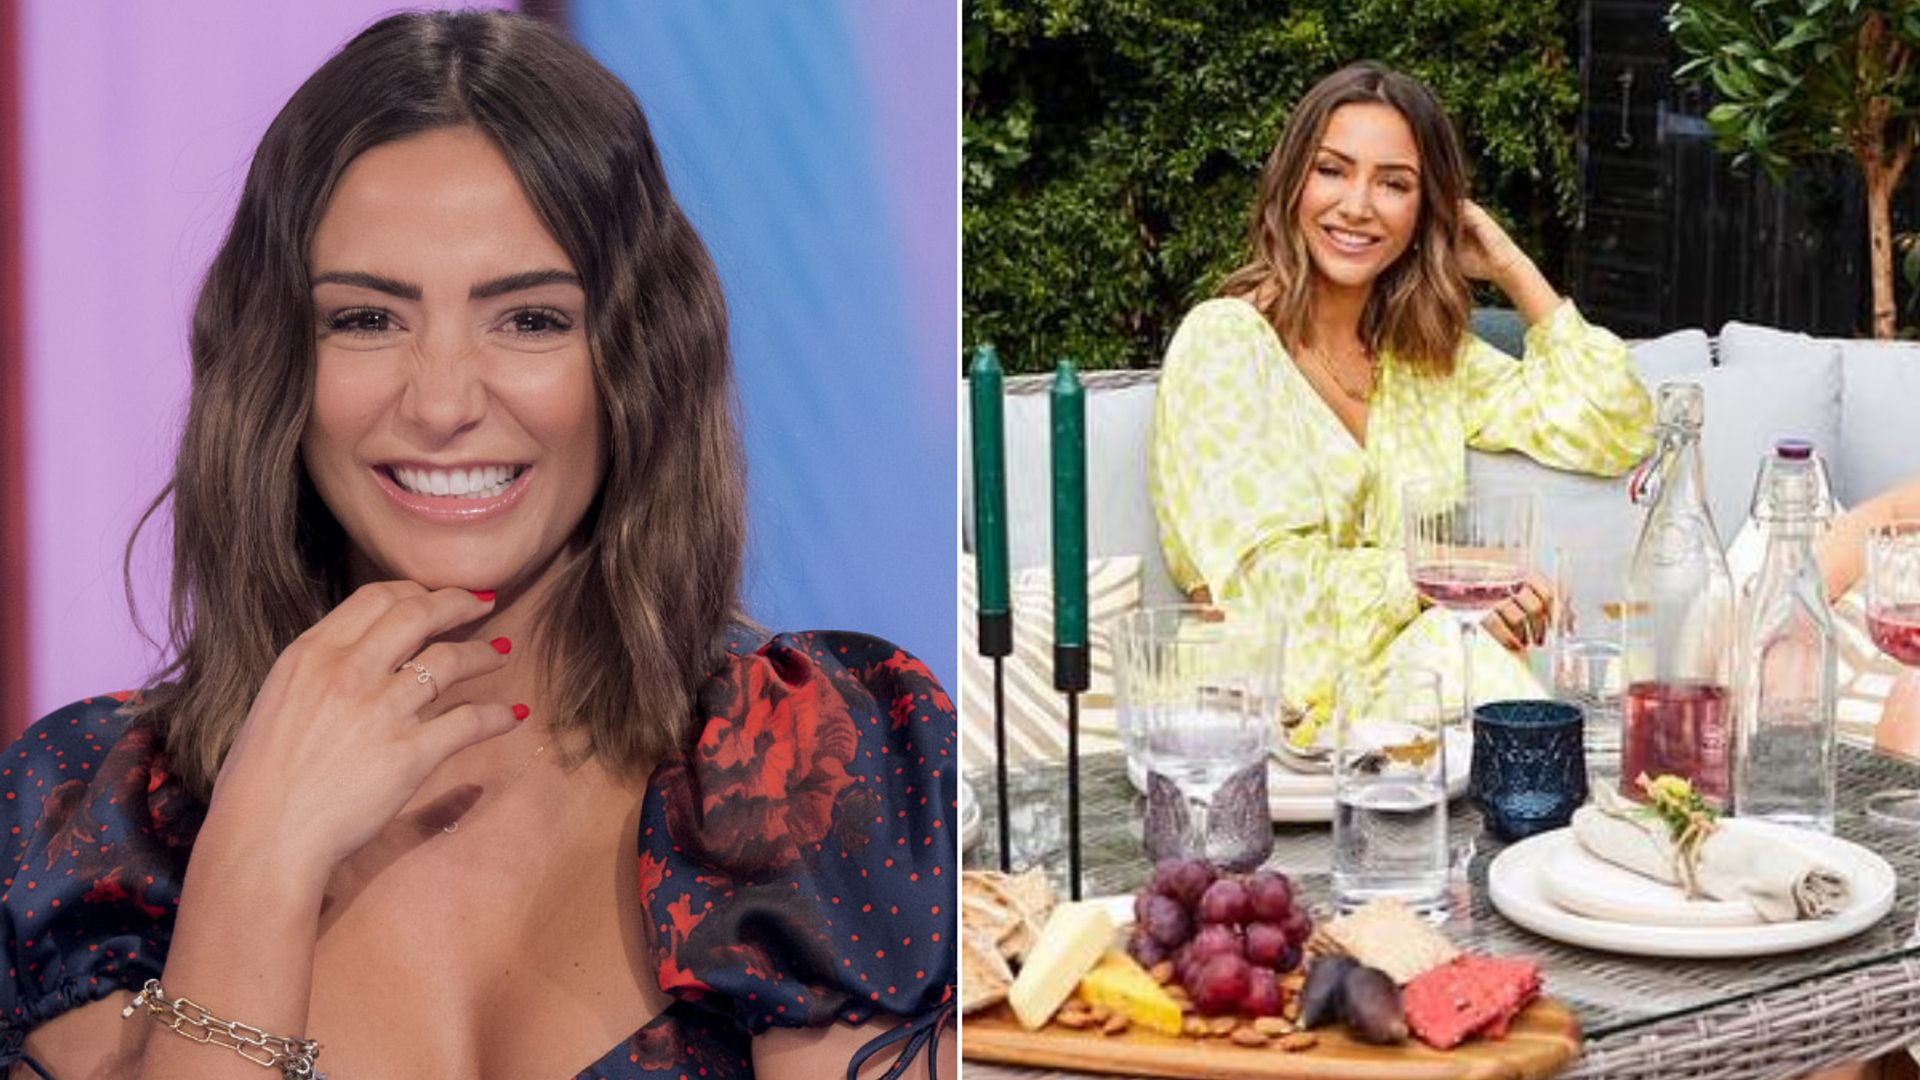 Frankie Bridge debuts magical garden makeover - here's how to recreate it on a budget